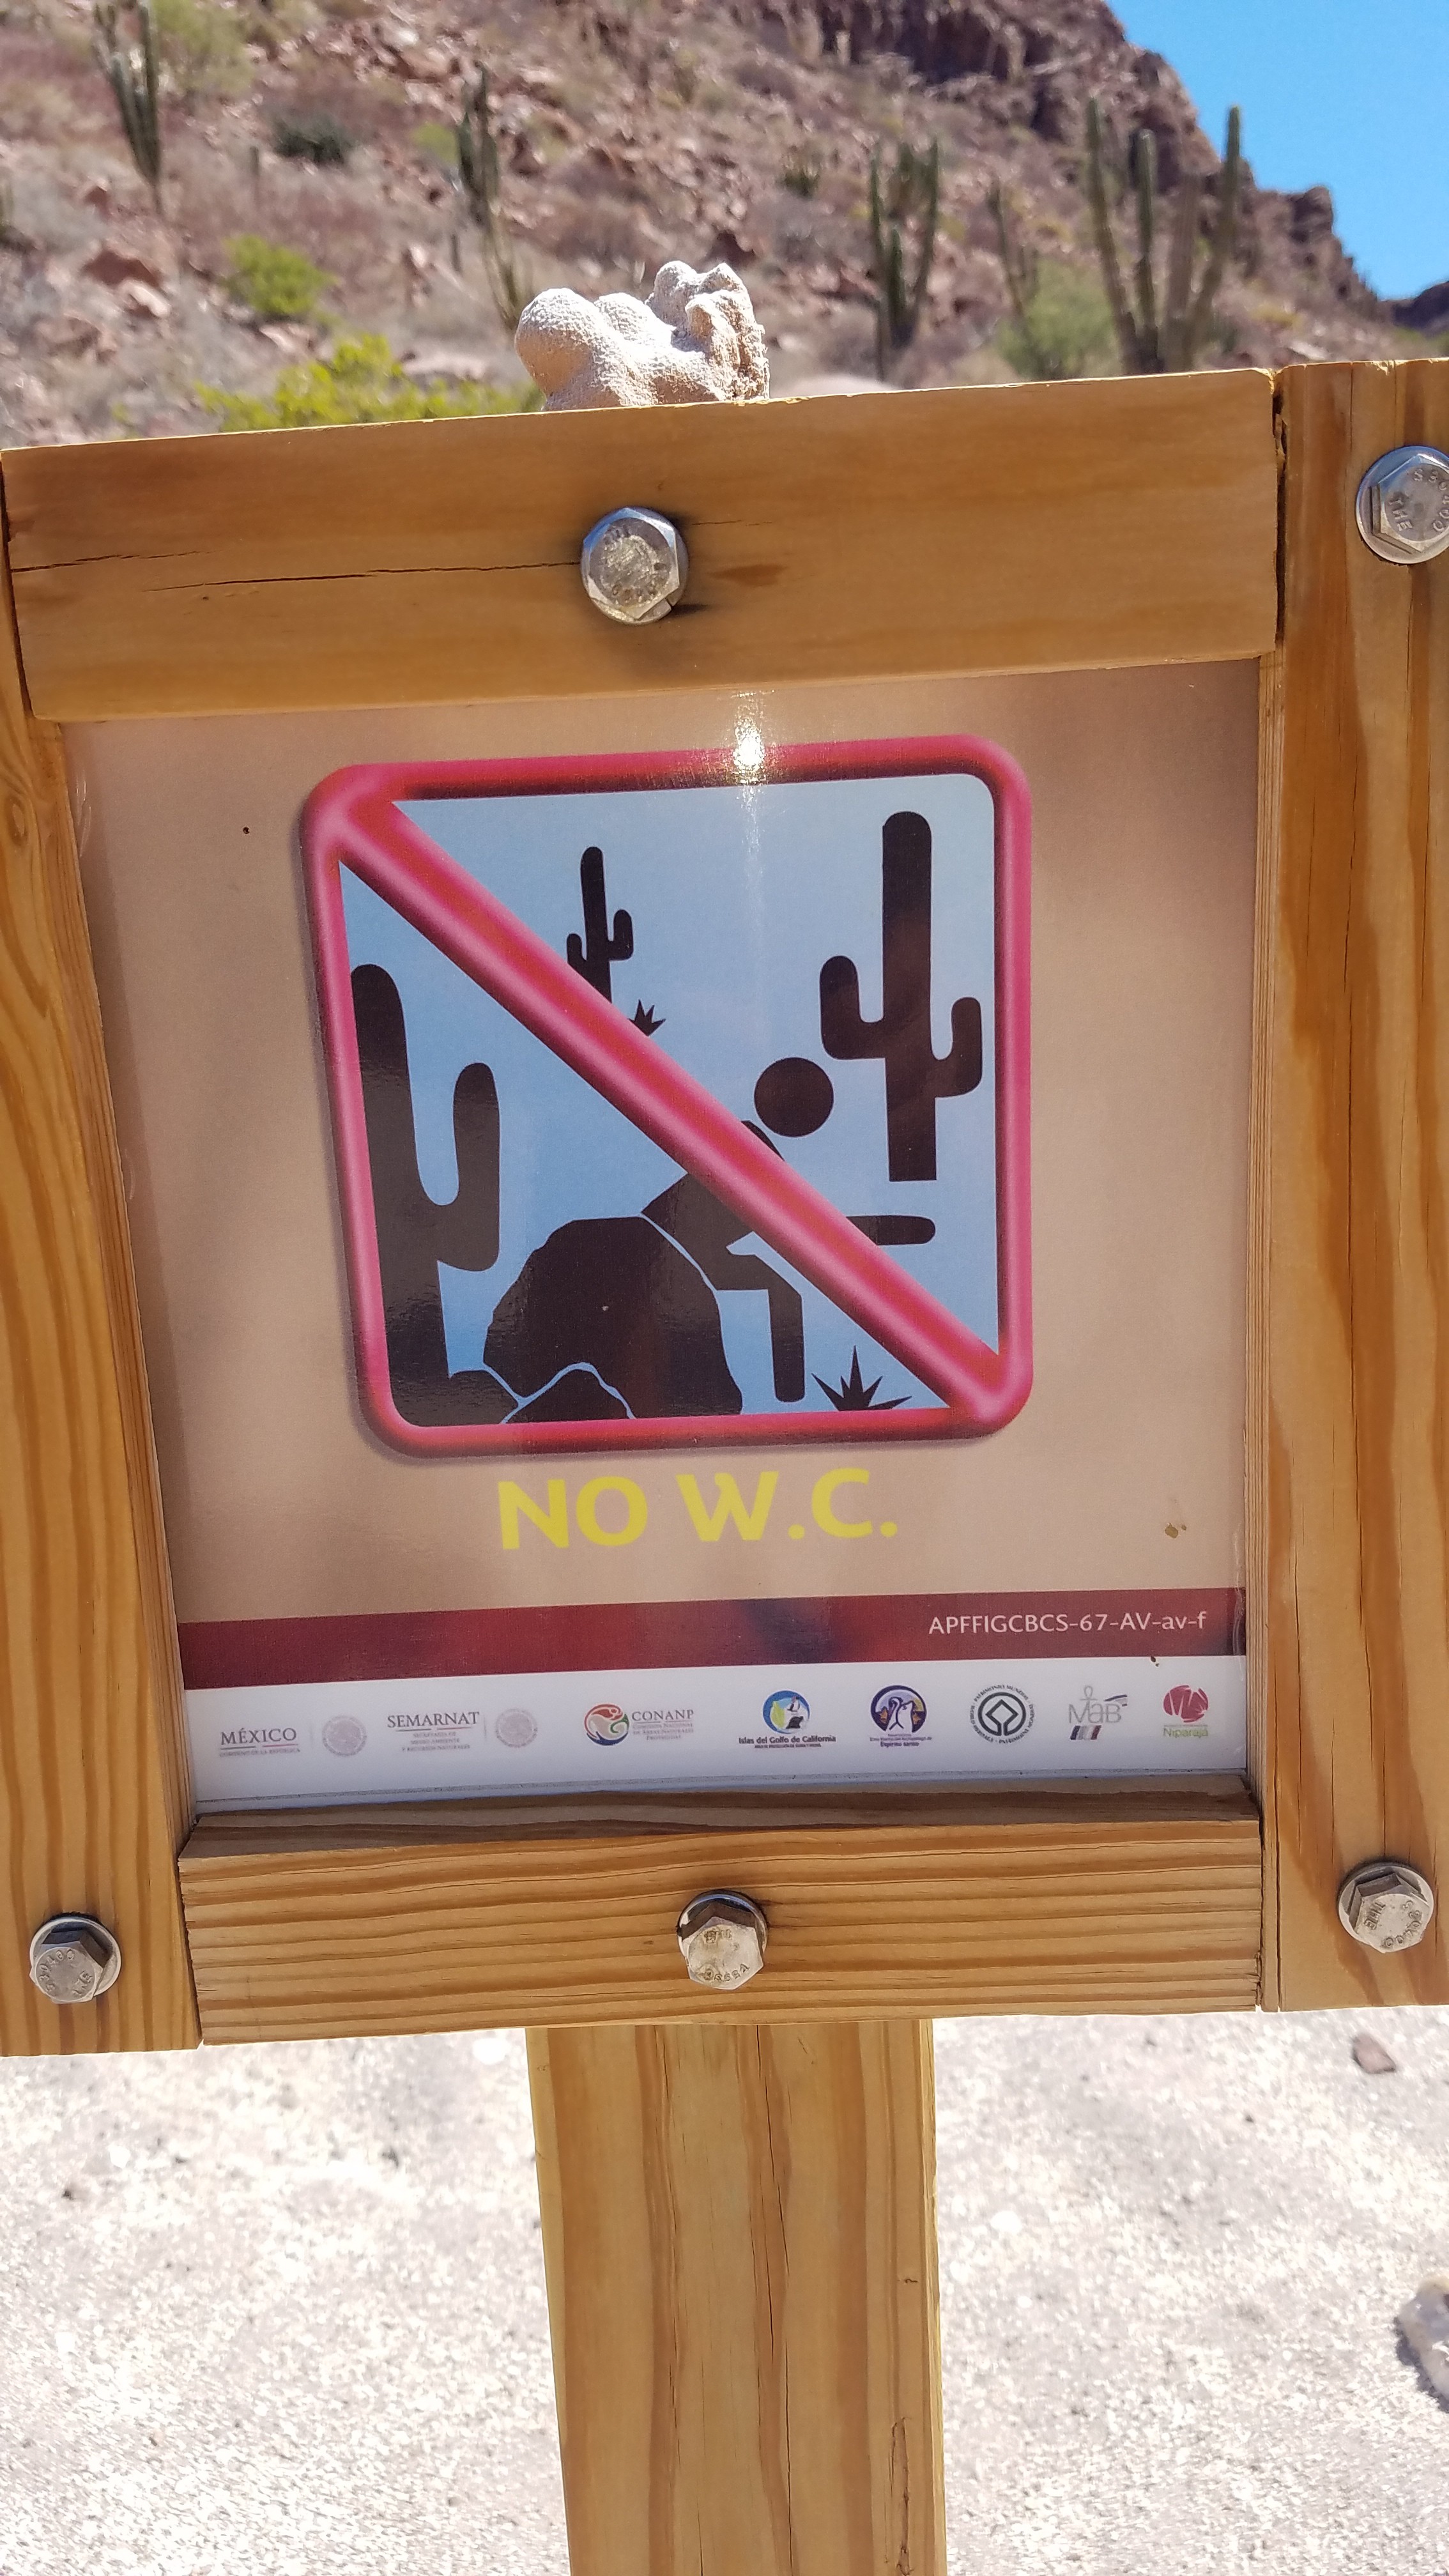 I think this means no pooping on the trail